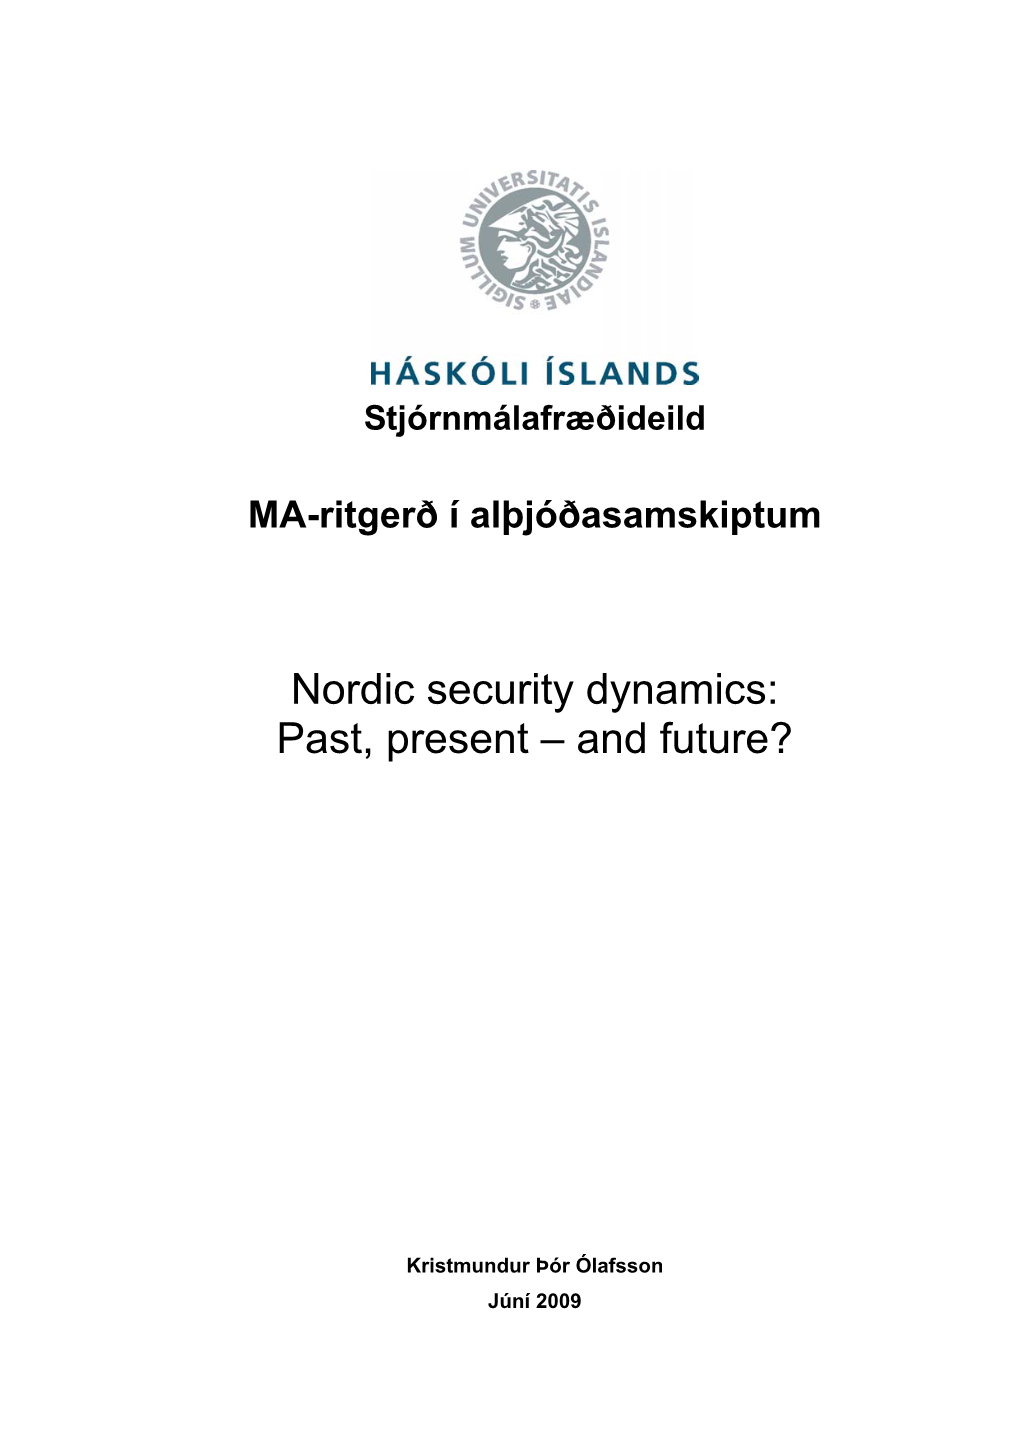 Nordic Security Dynamics: Past, Present – and Future?